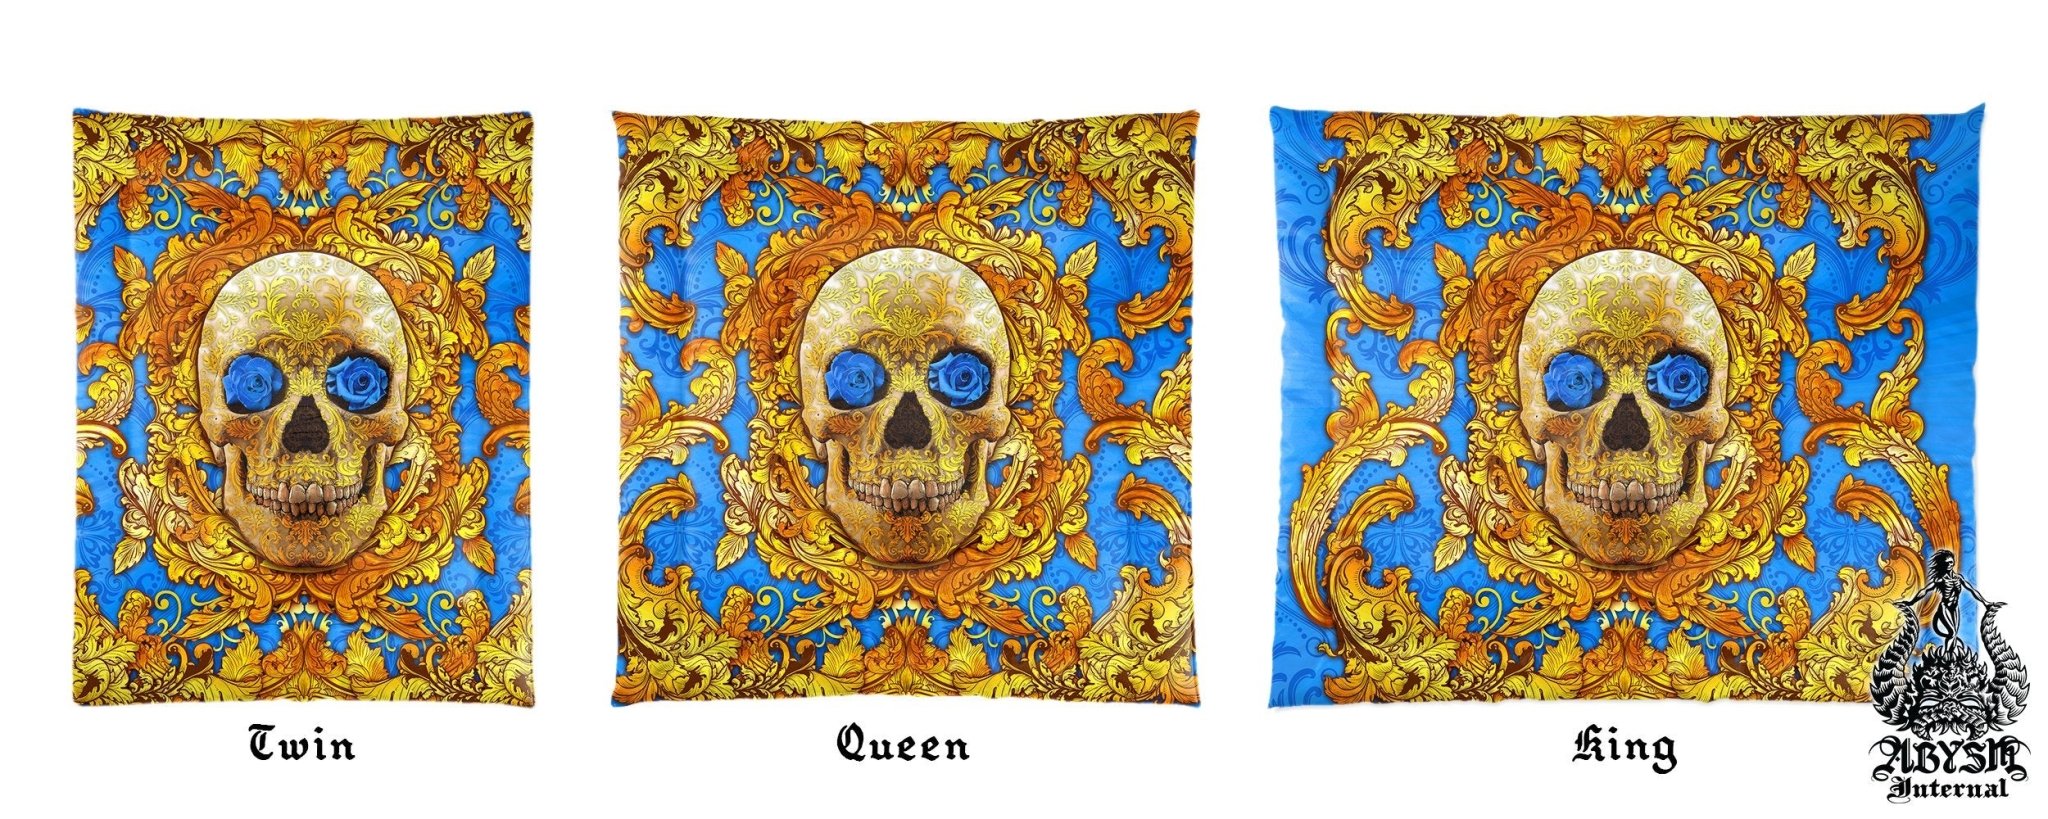 Skull Bedding Set, Comforter and Duvet, Vintage and Victorian Bed Cover and Bedroom Decor, King, Queen and Twin Size - Cyan and Gold - Abysm Internal